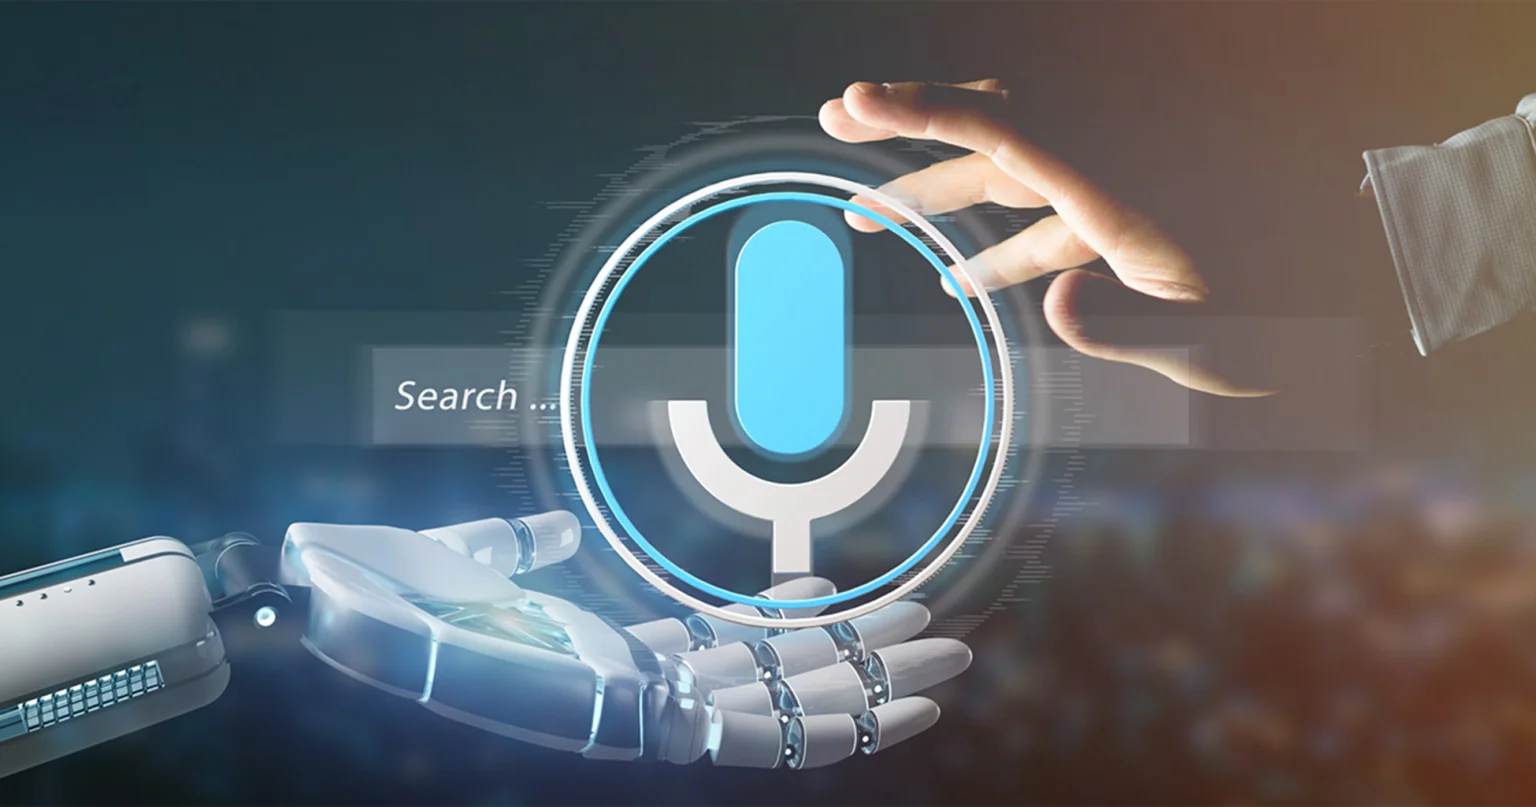 Optimize for Voice Search